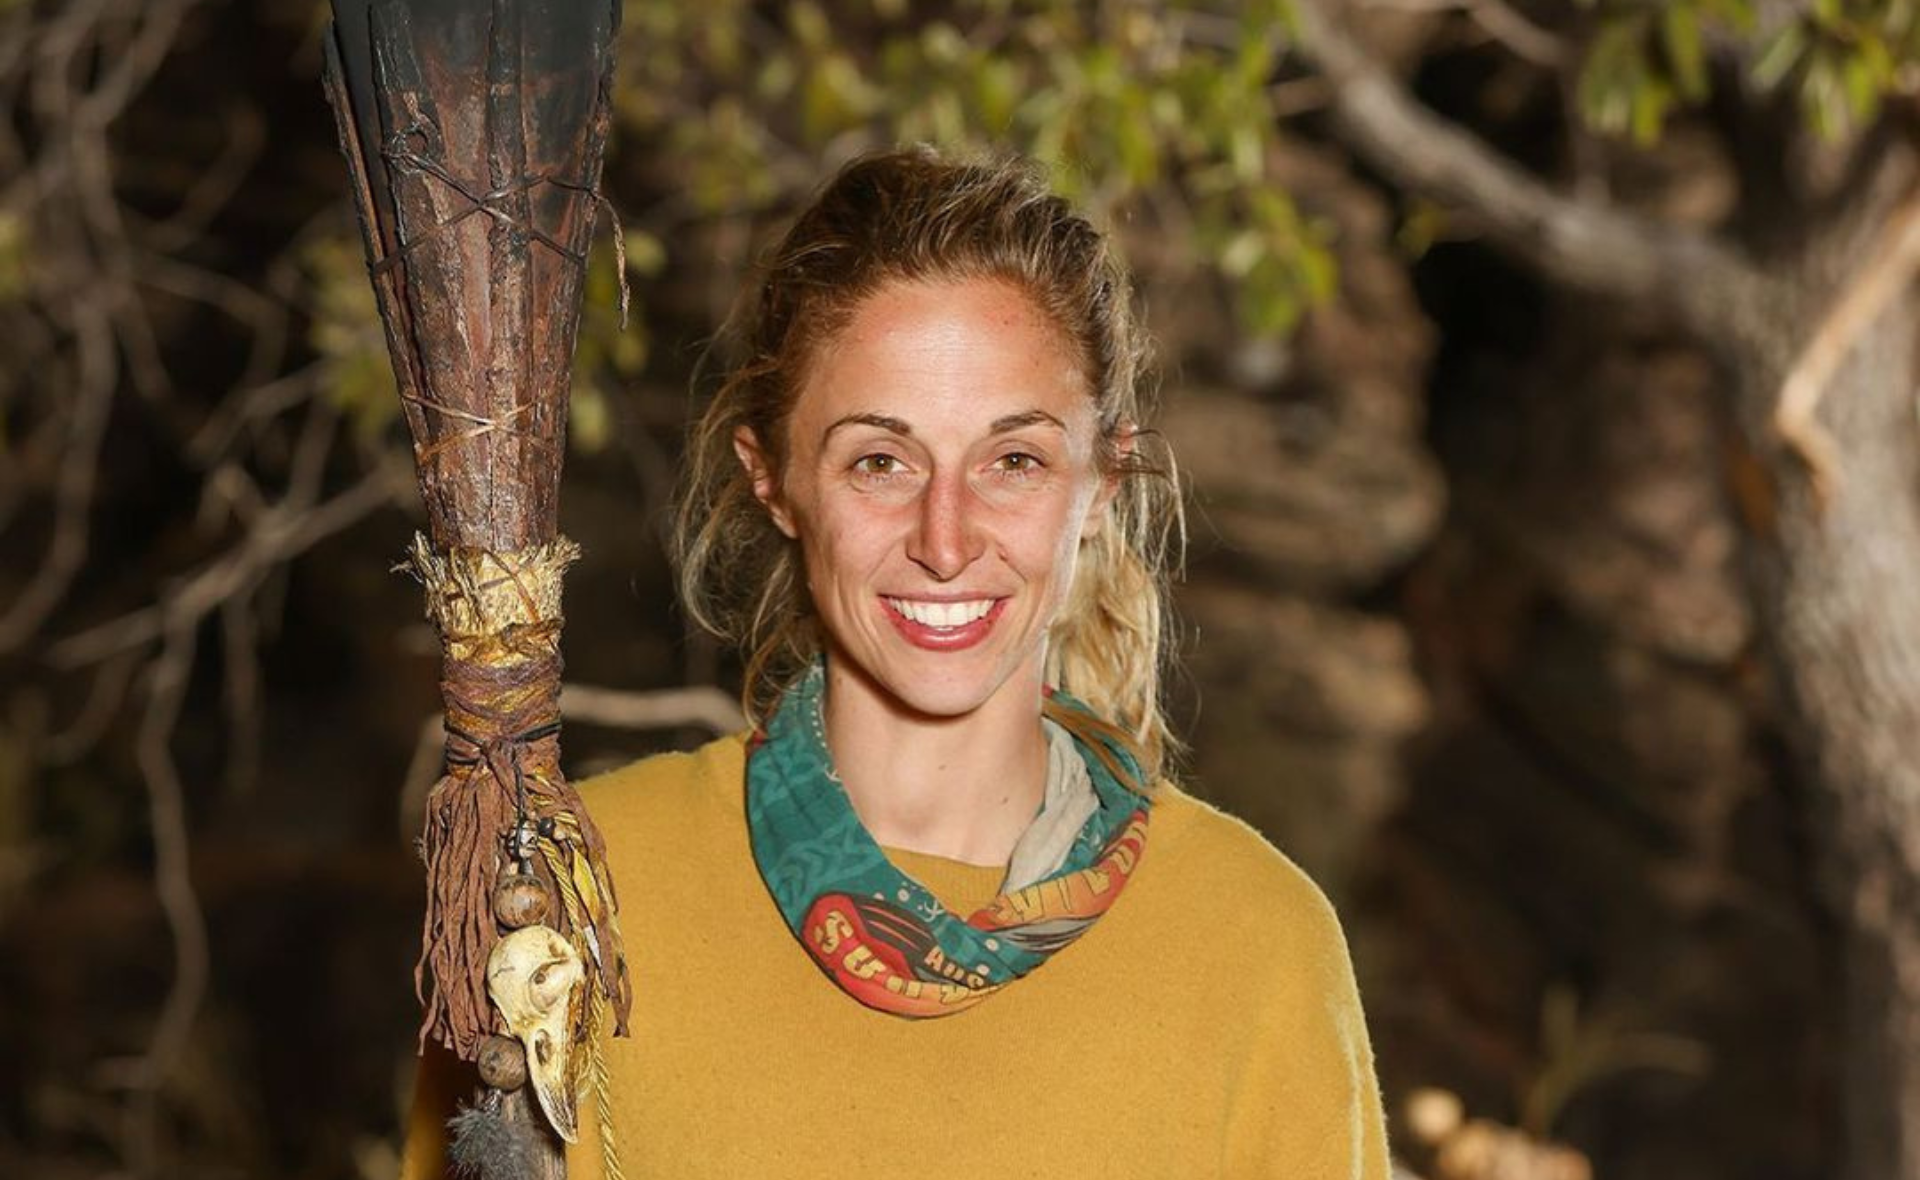 Hayley Leake vows to become the only two-time winner of Australian Survivor